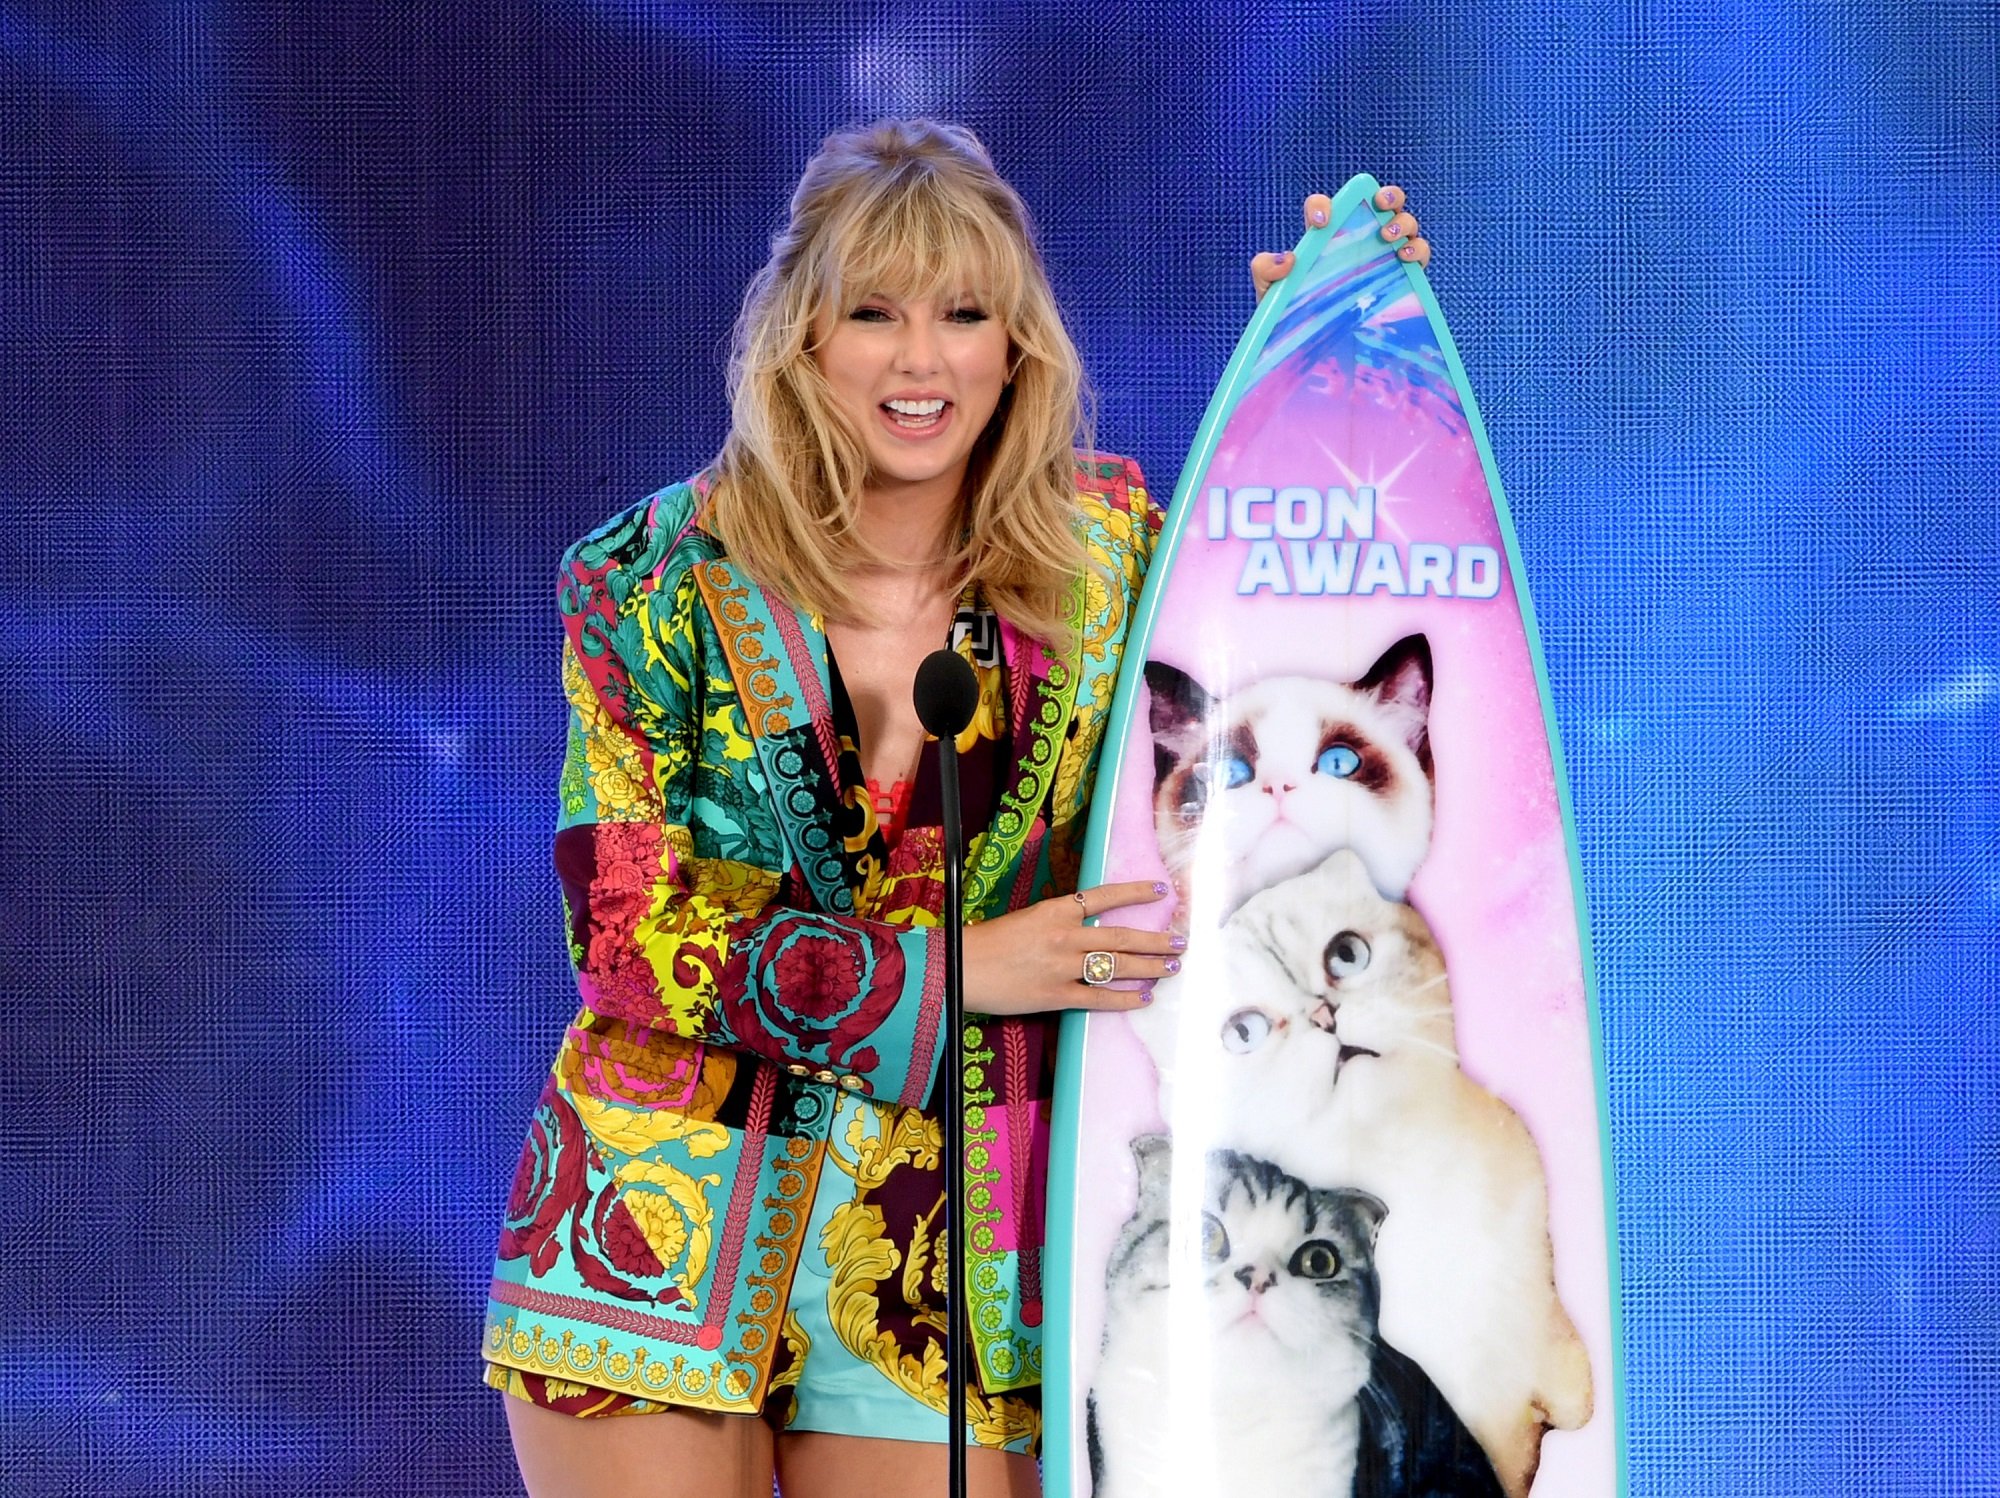 Taylor Swift stands on stage next to a surfboard with photos of her cats Benjamin, Olivia, and Meredith